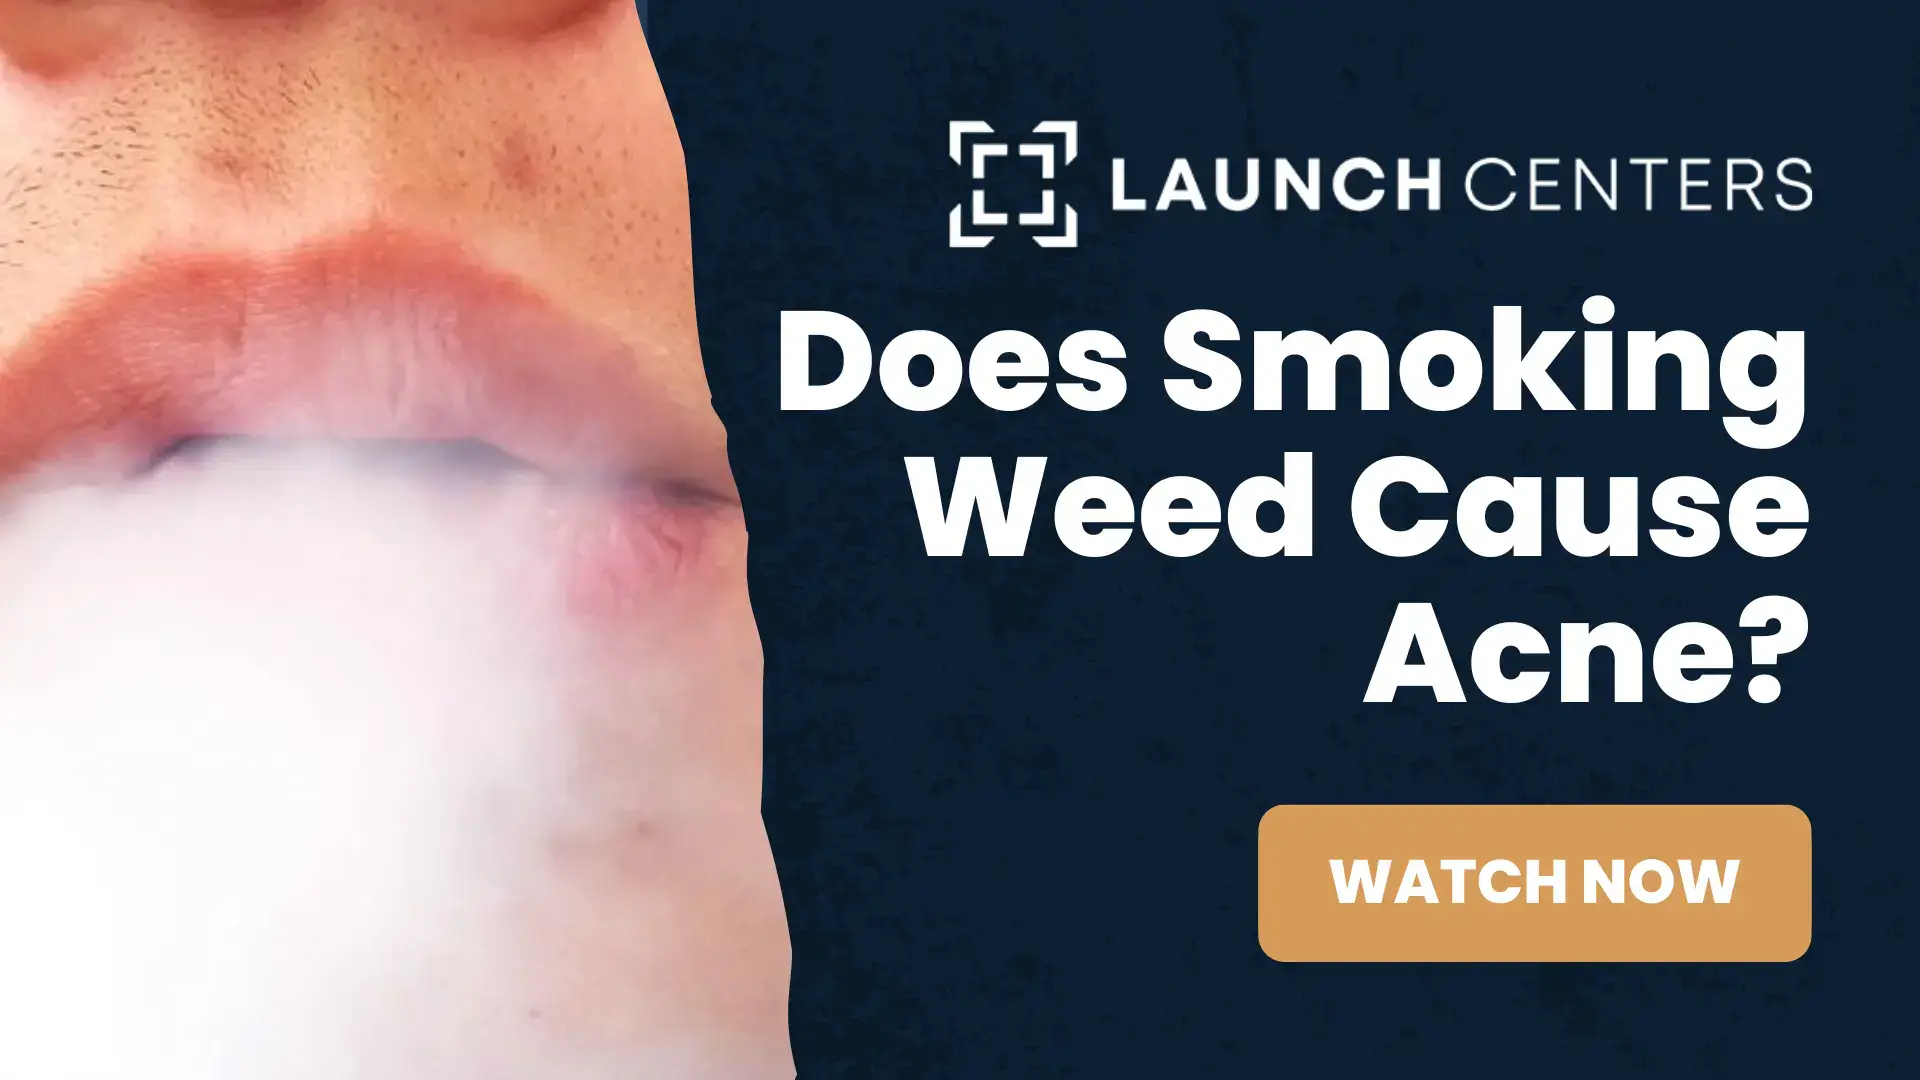 does smoking weed cause acne?